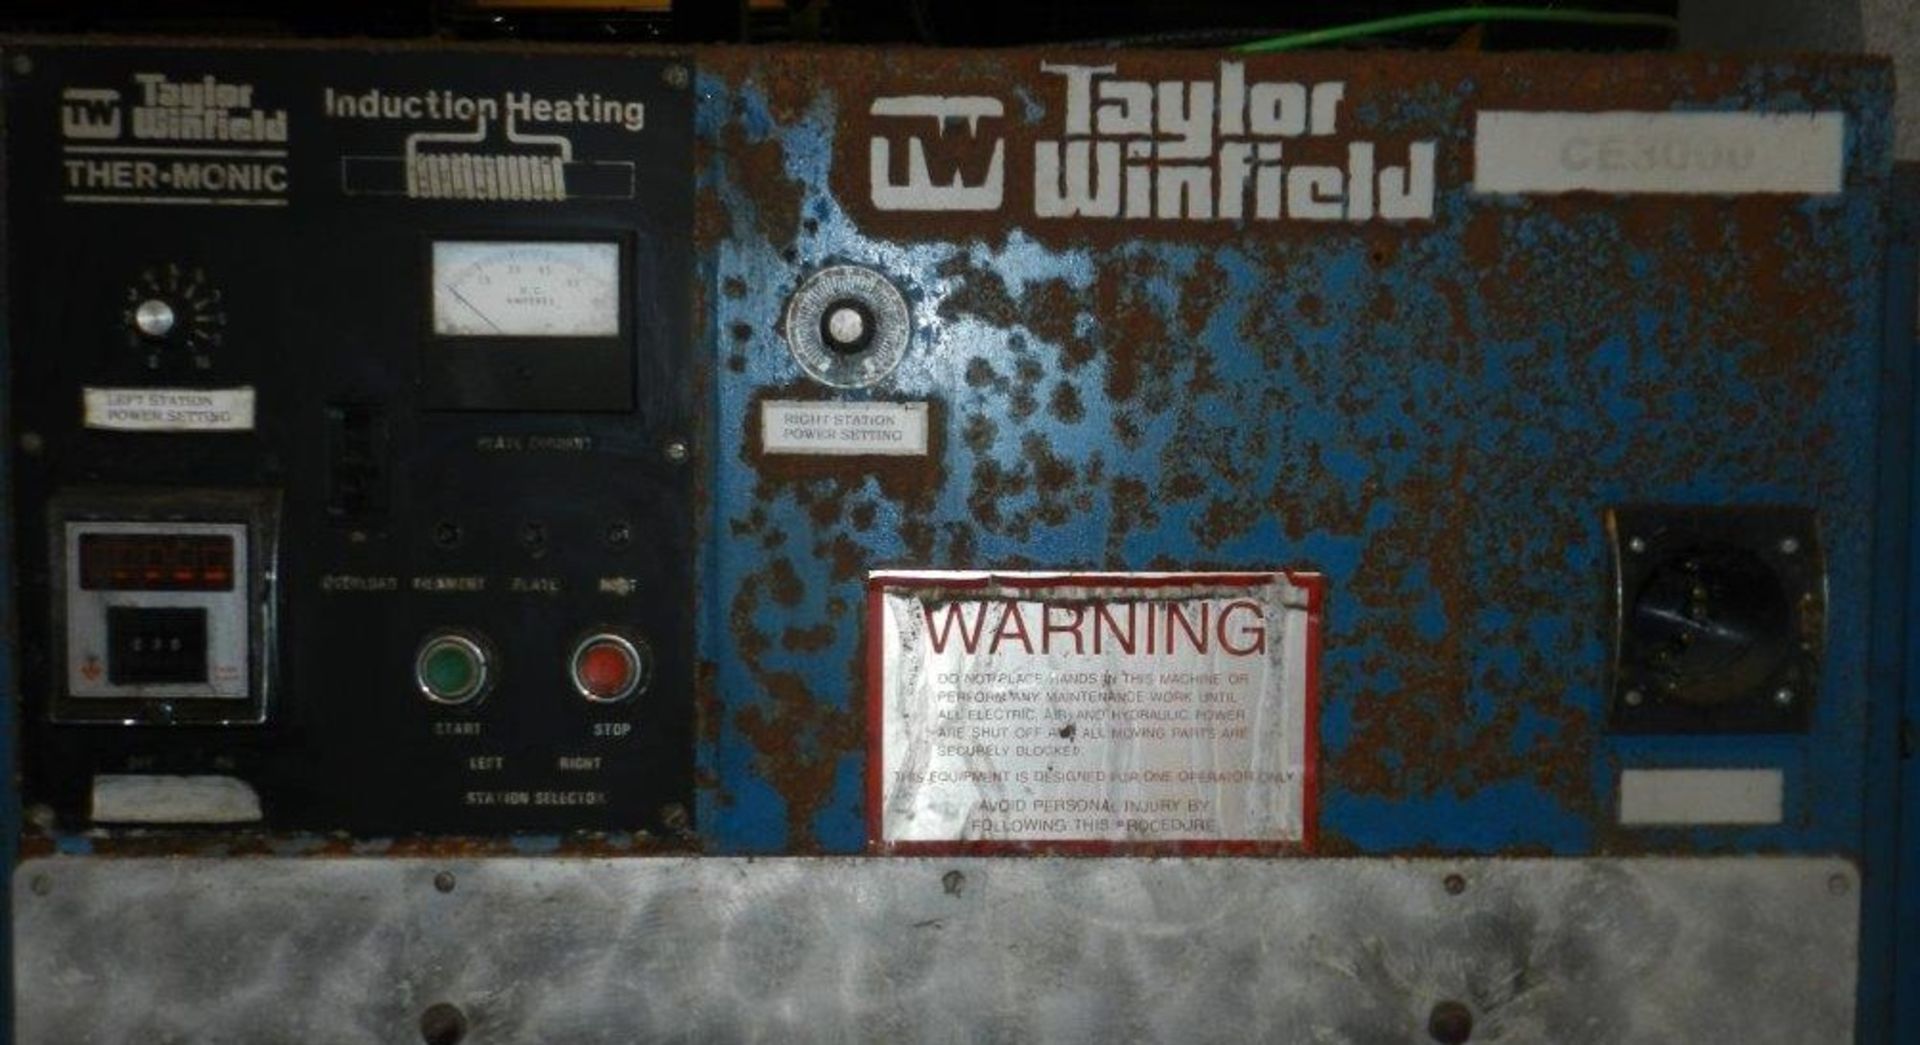 Taylor Winfield CE-3000 30 kW Dual Station Induction Hardener - Image 6 of 12